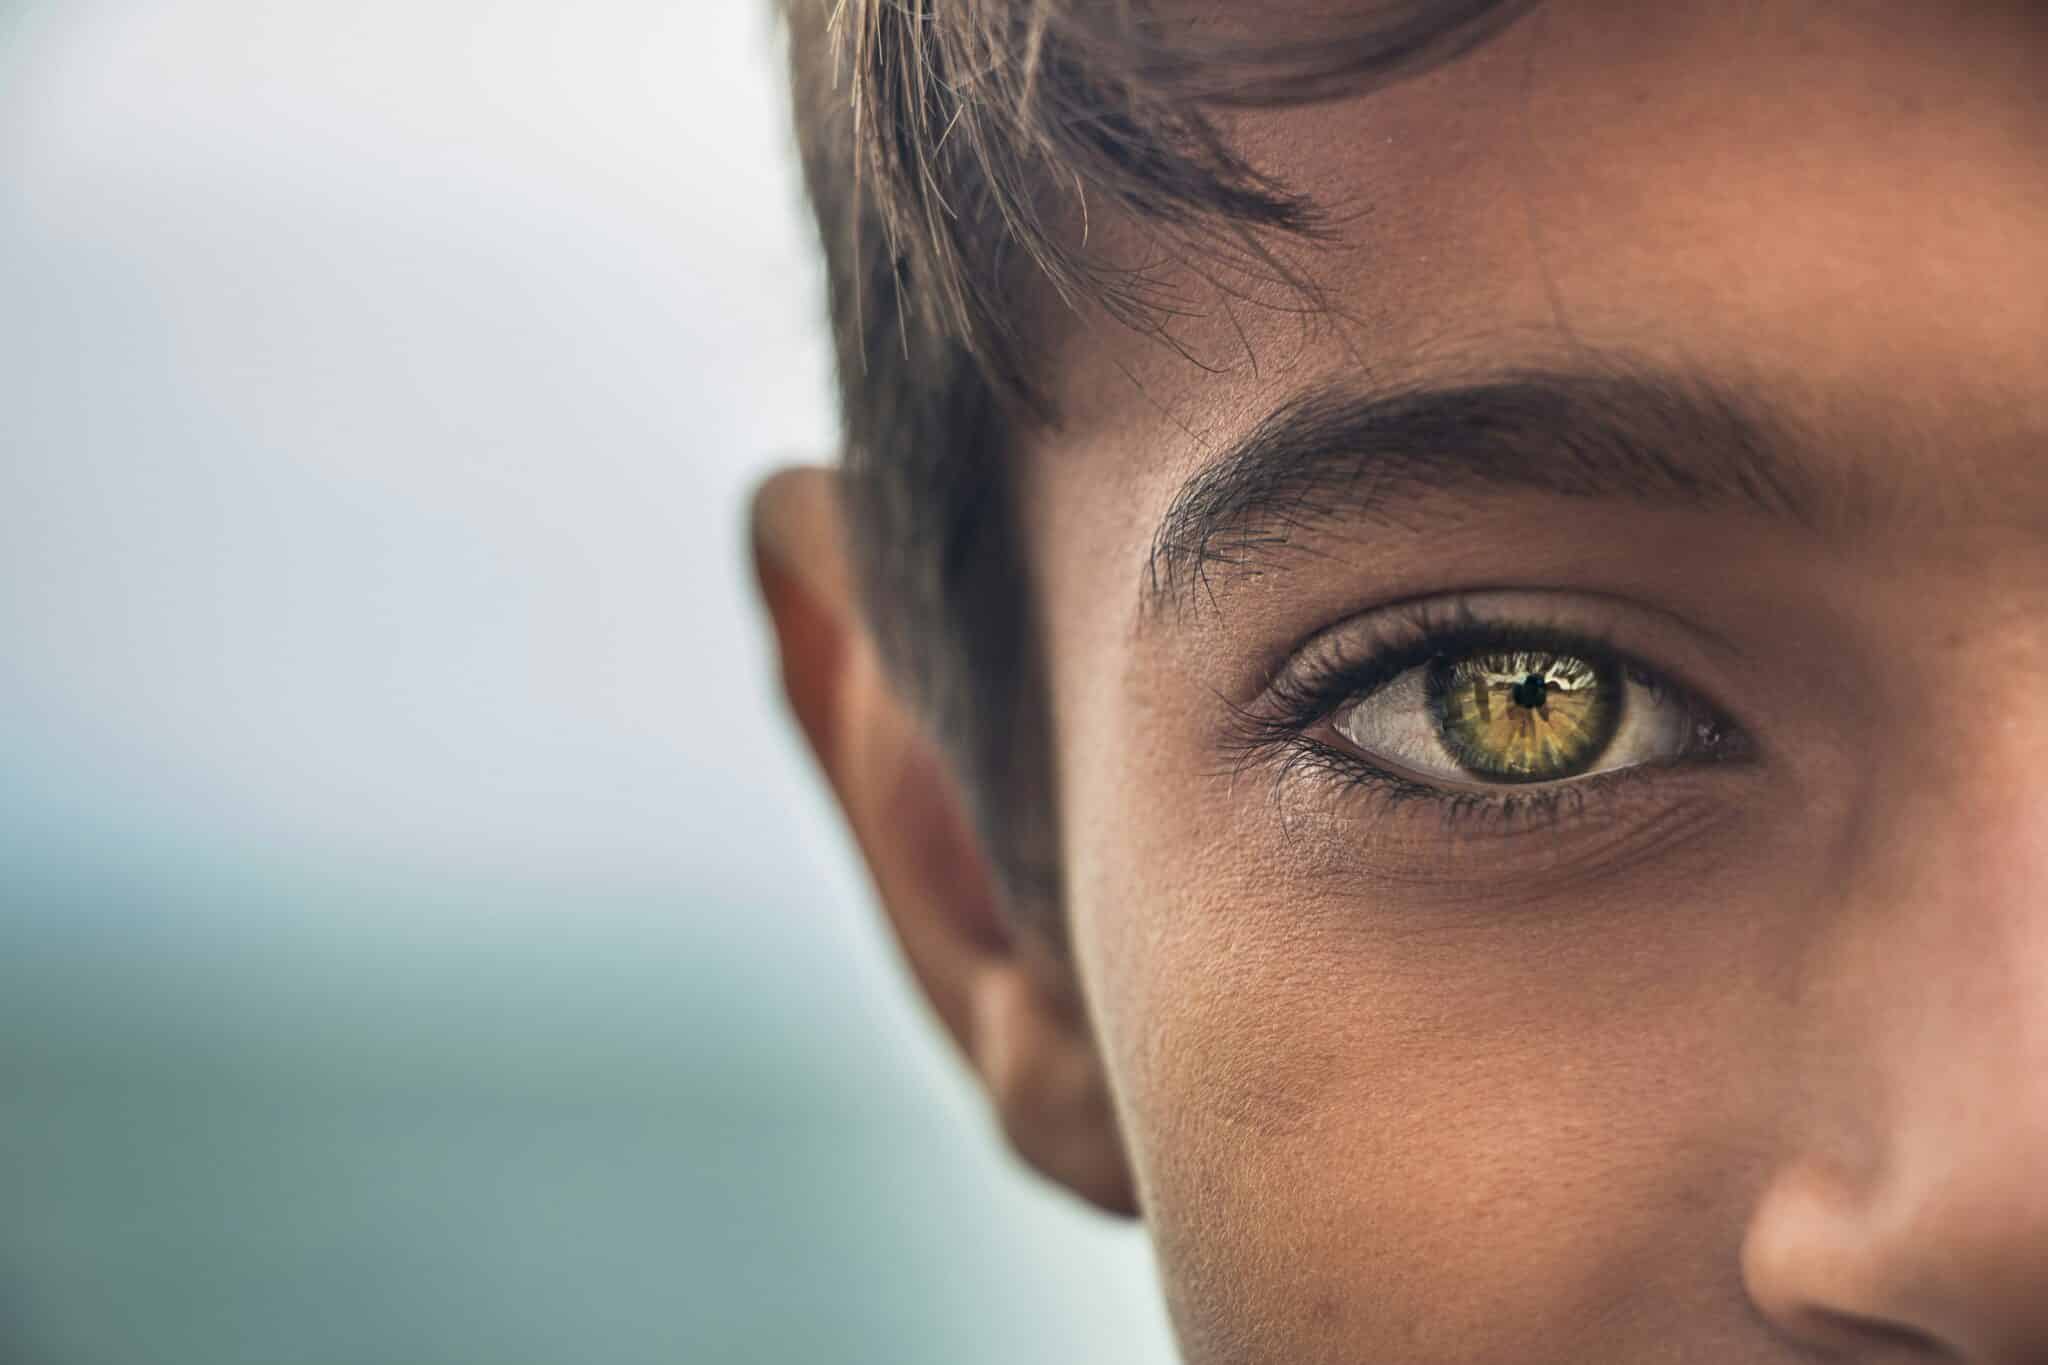 Young man with brown eyes | Photo by MohammadHosein Mohebbi on Unsplash